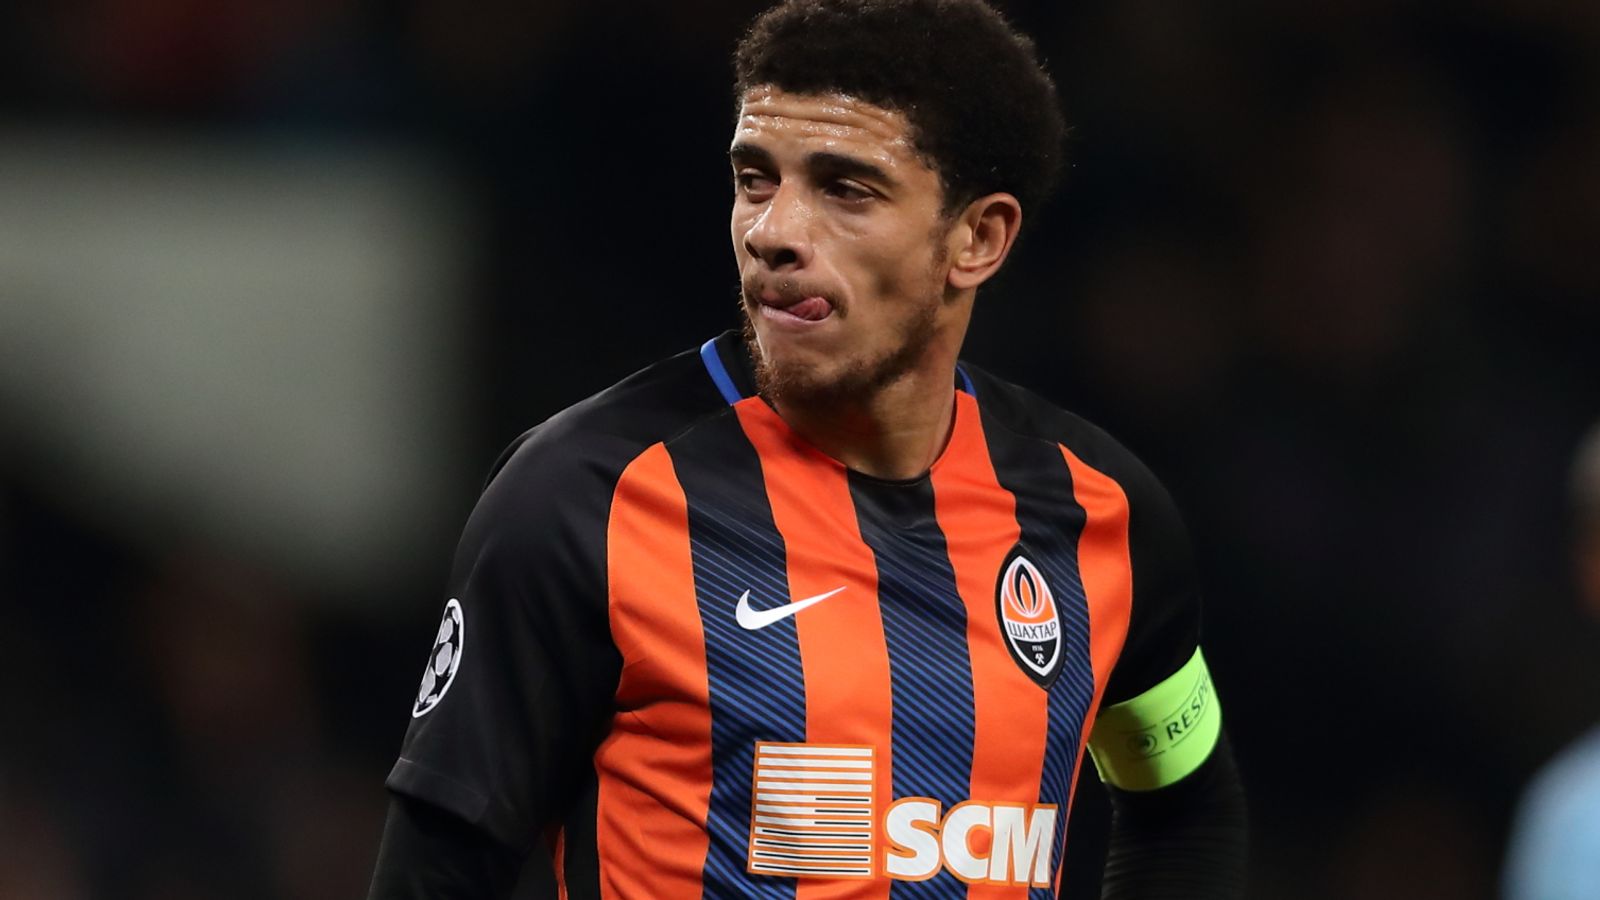 taison jersey number